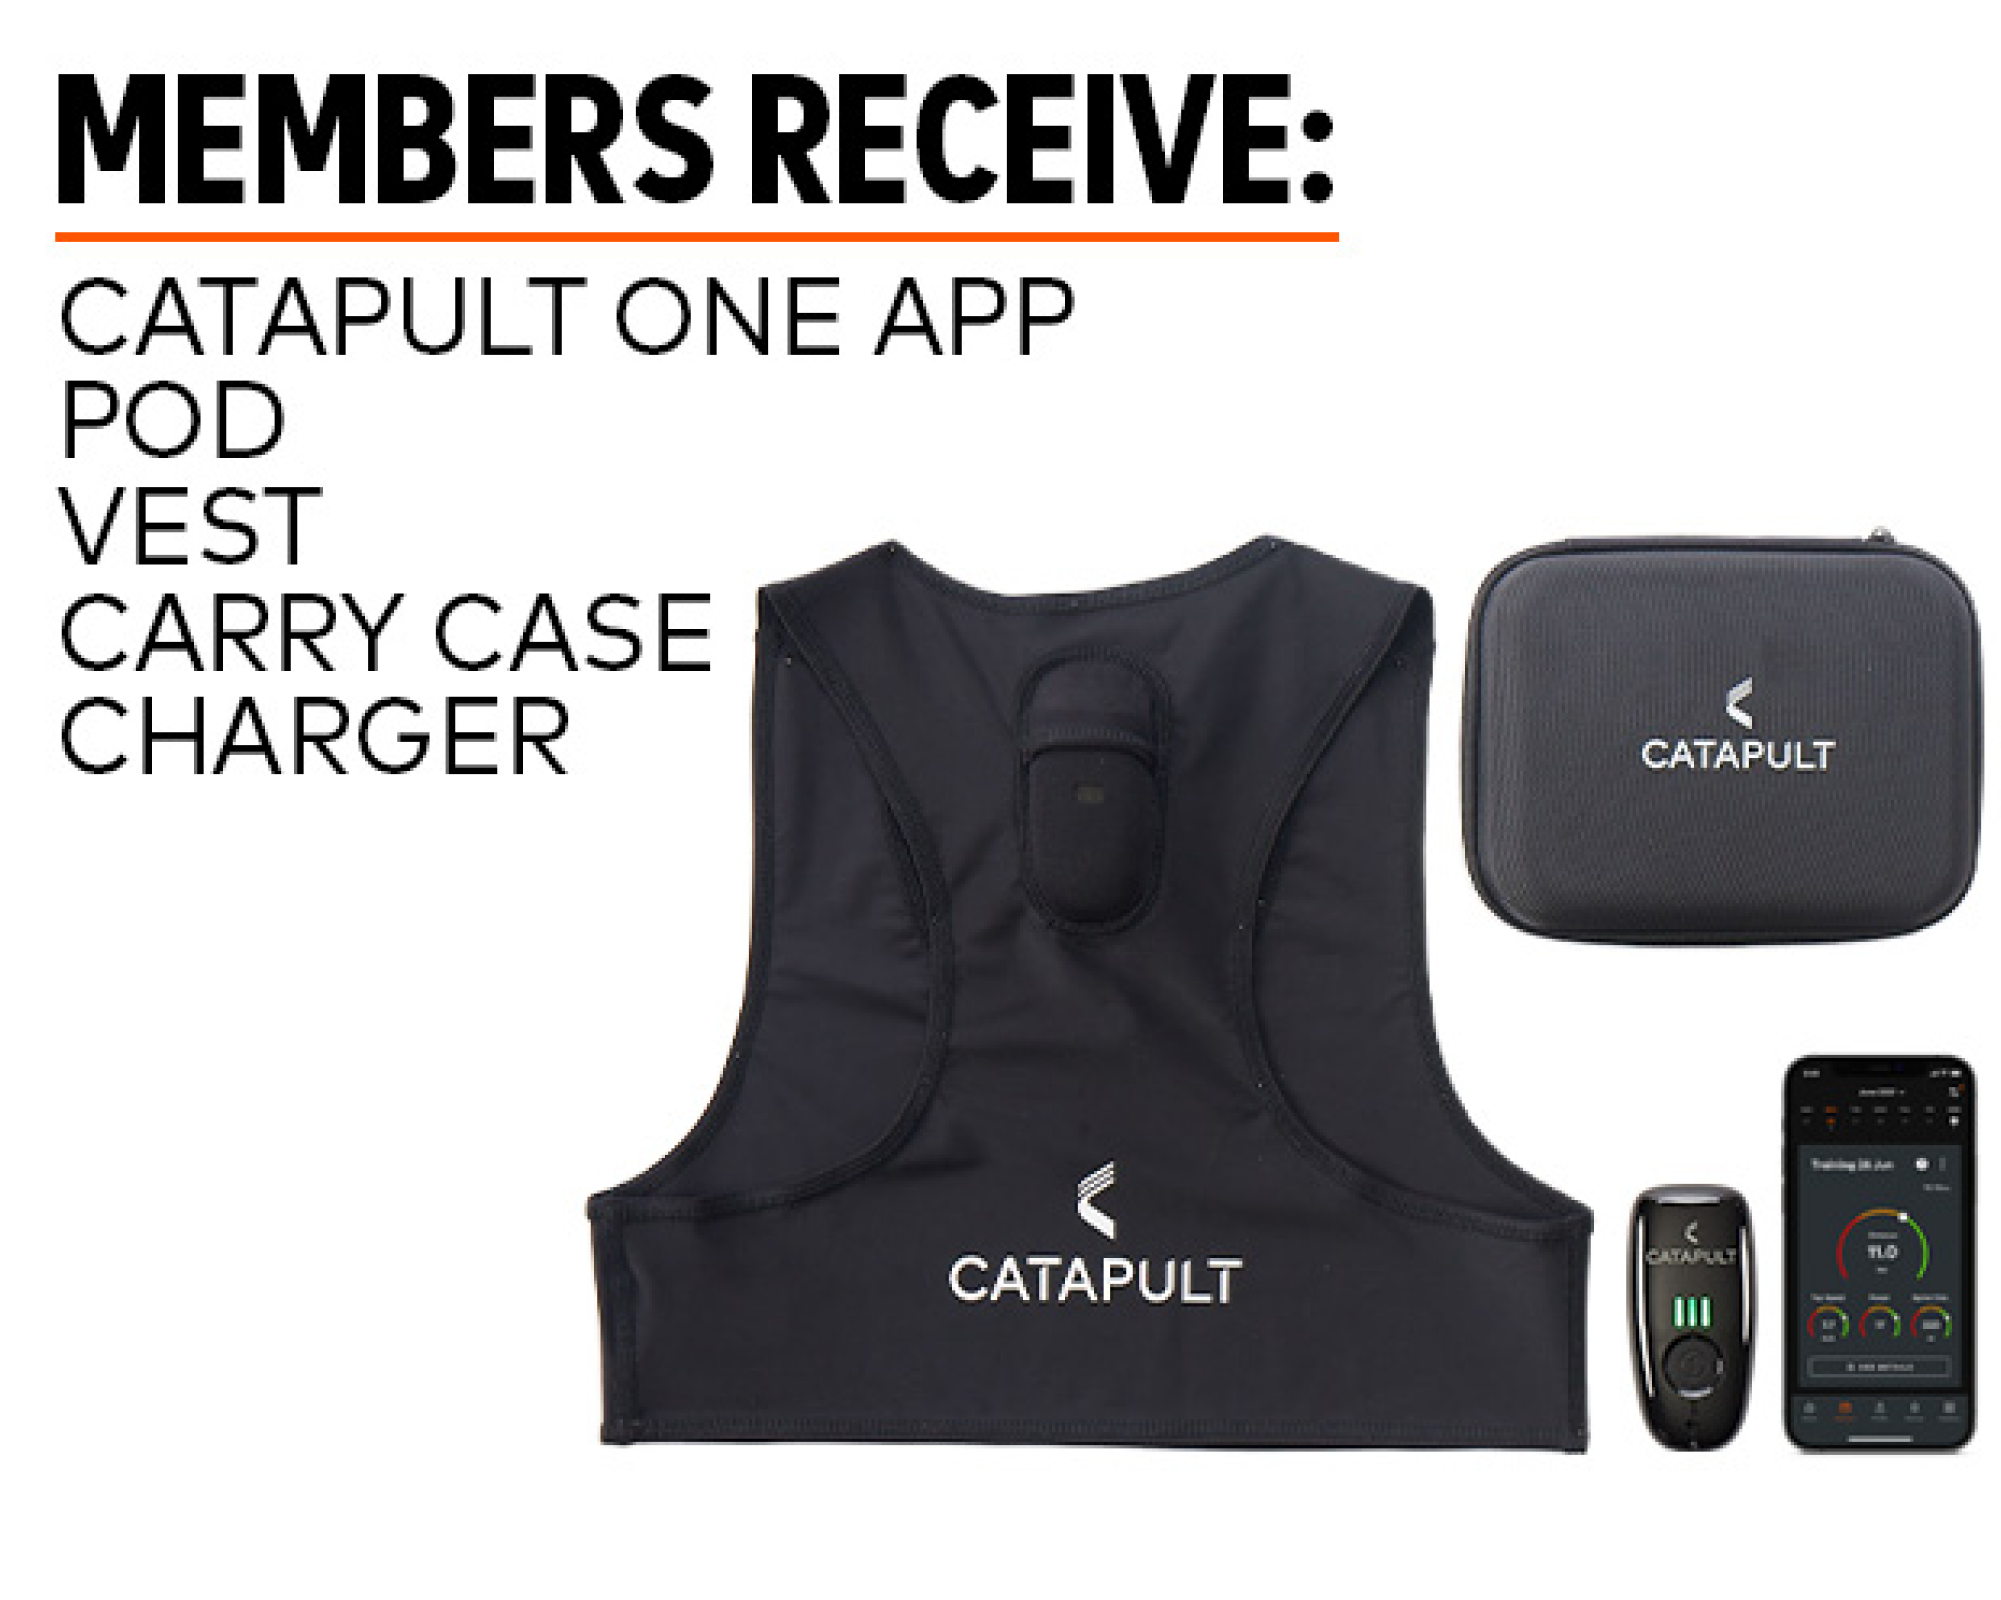 Elite sports wearables maker Catapult Sports buys GPSports, no IPO